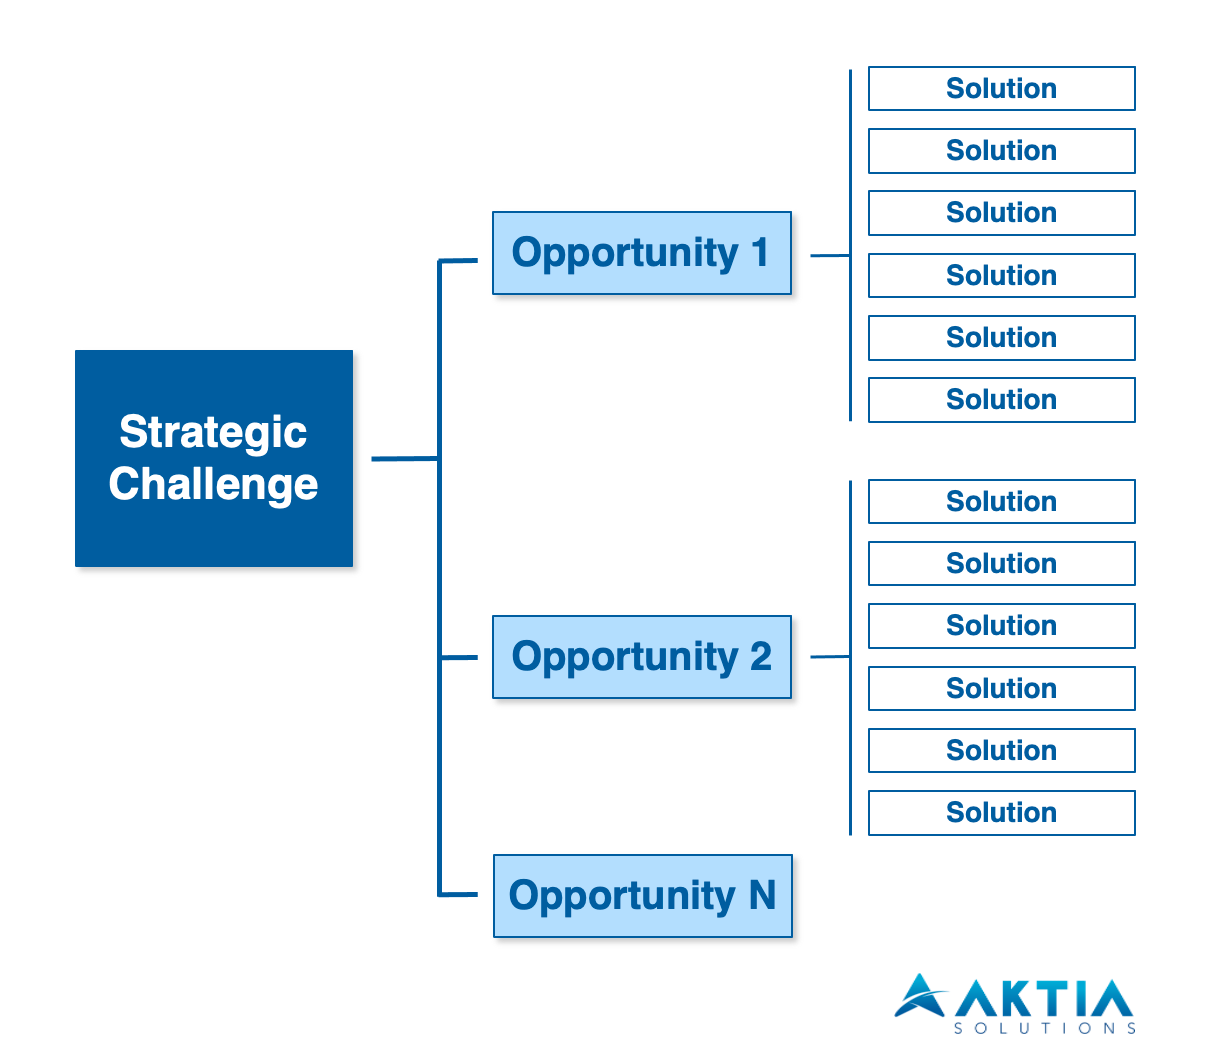 Strategy-Design-Challenge-Opportunity-Solution-Aktia-Solutions